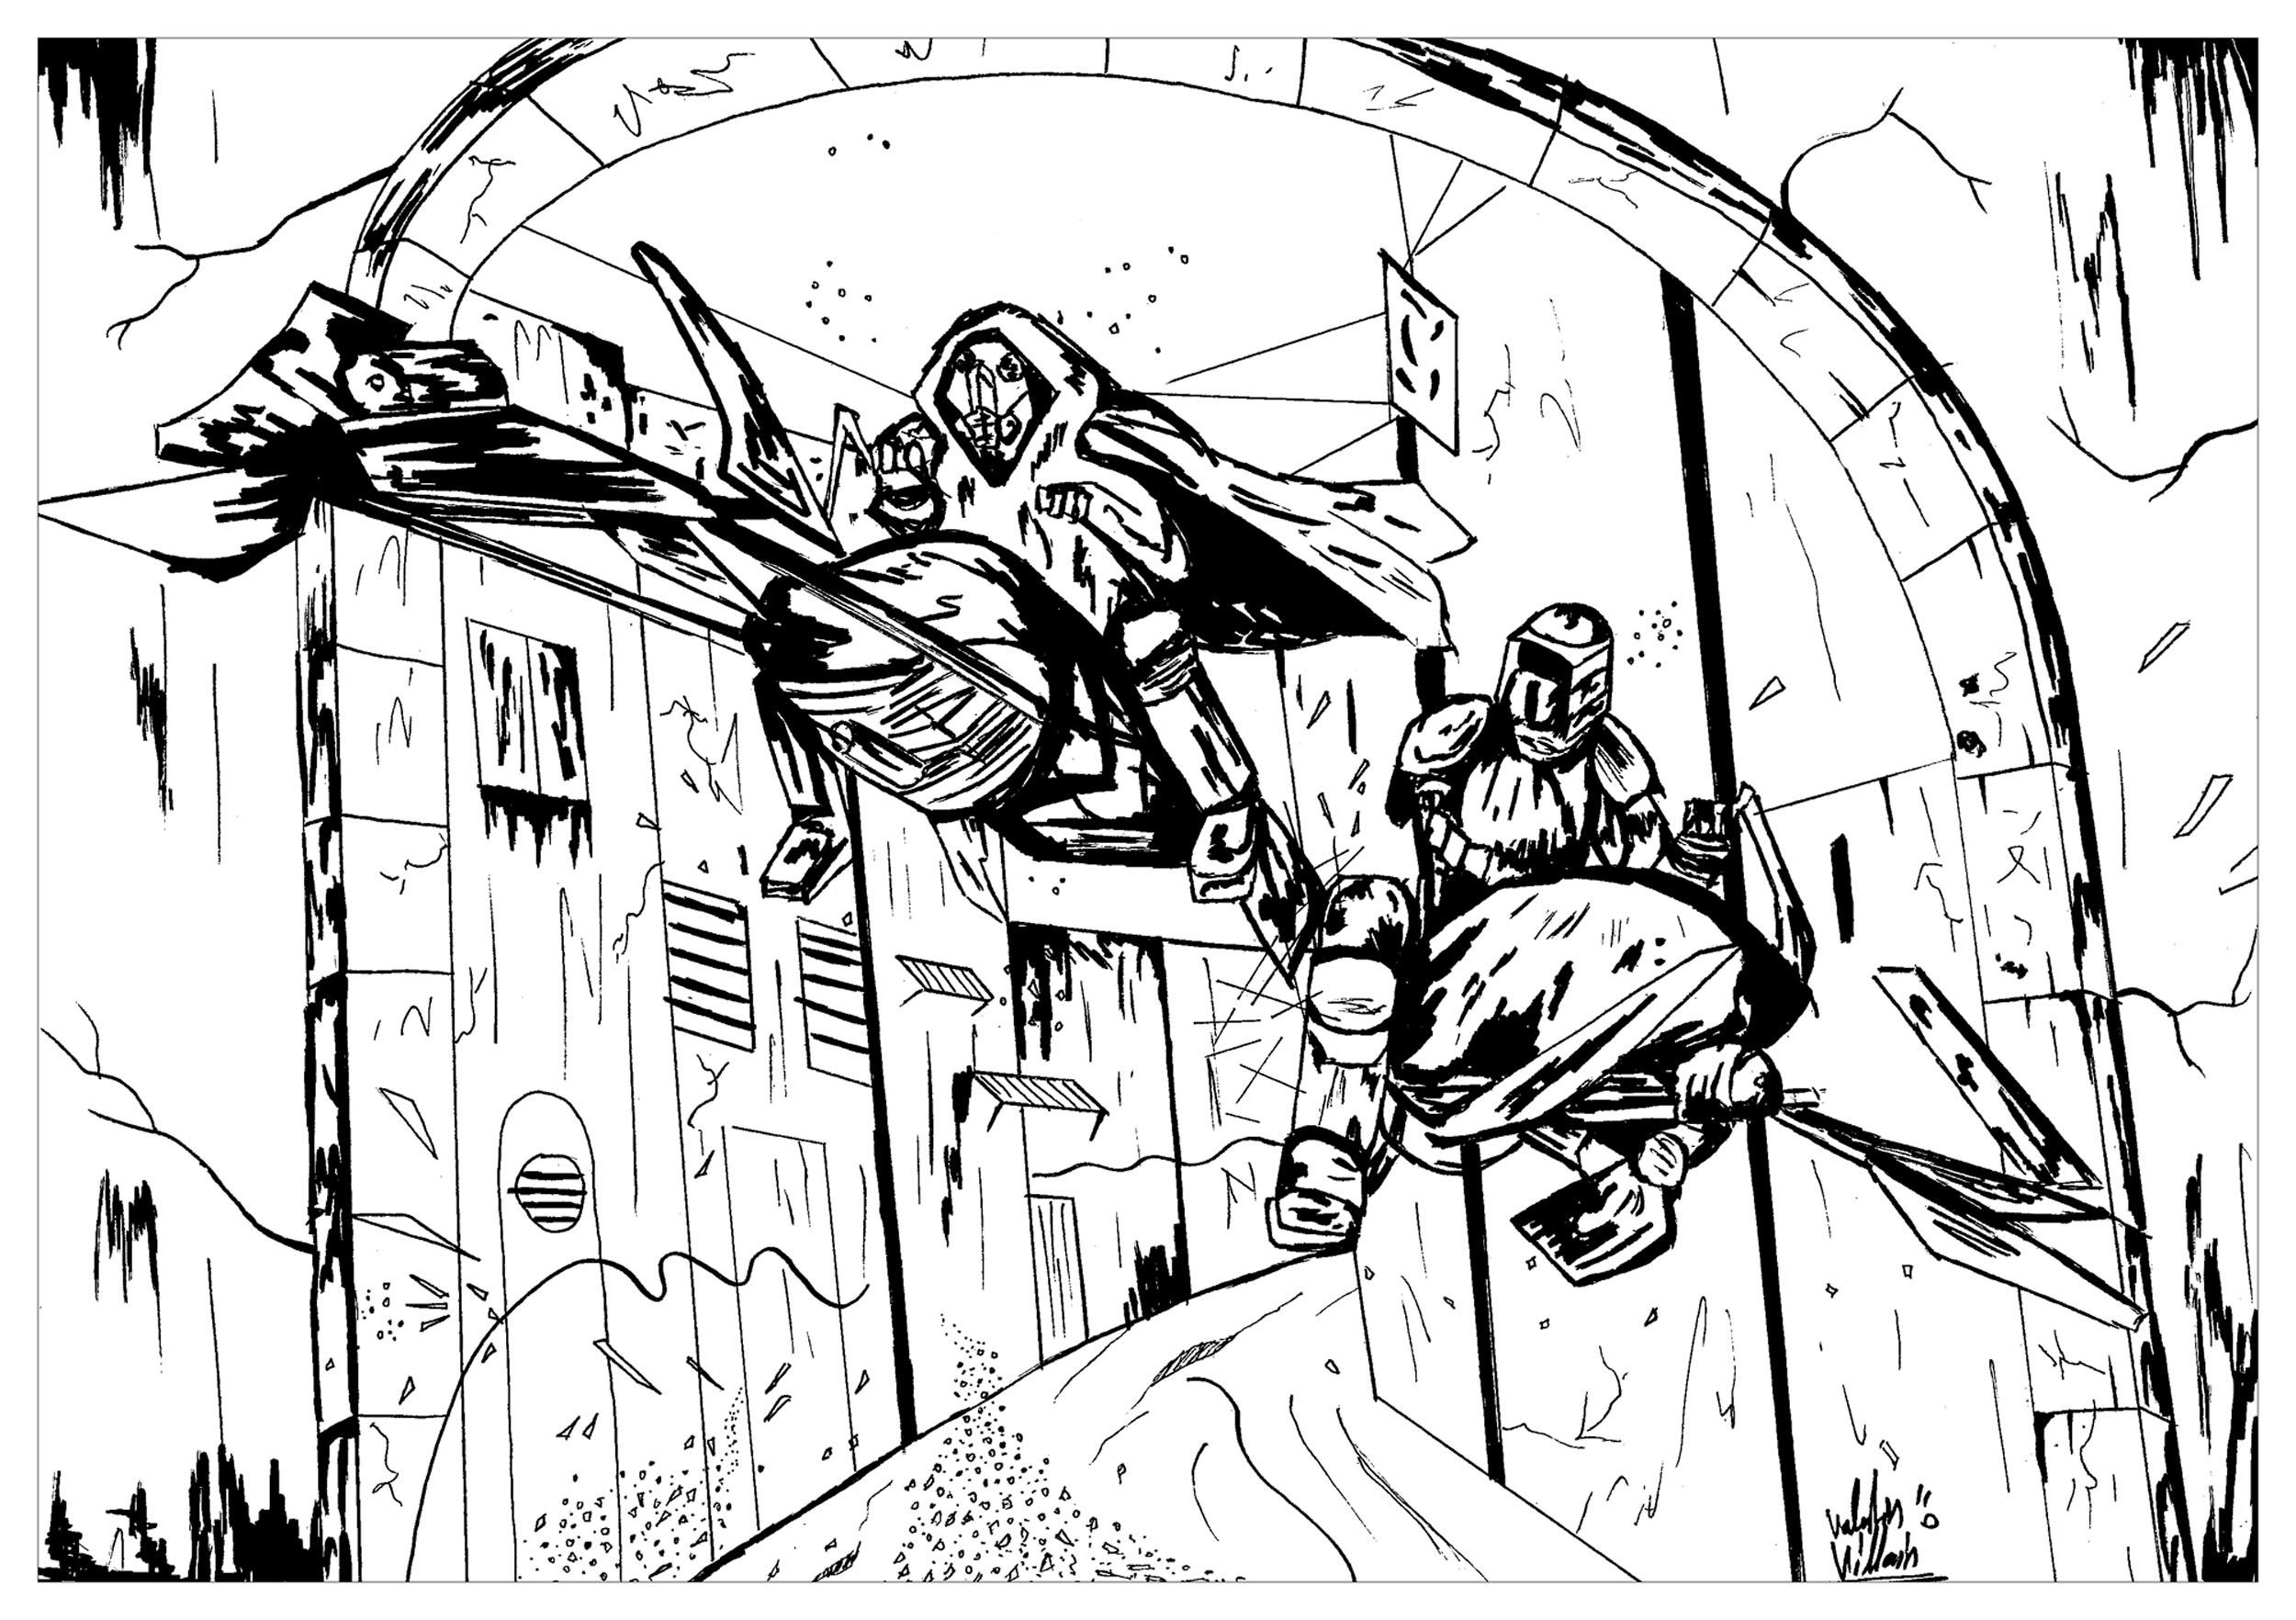 Coloring page of a chase scene inspired by Star Wars, Artist : Valentin